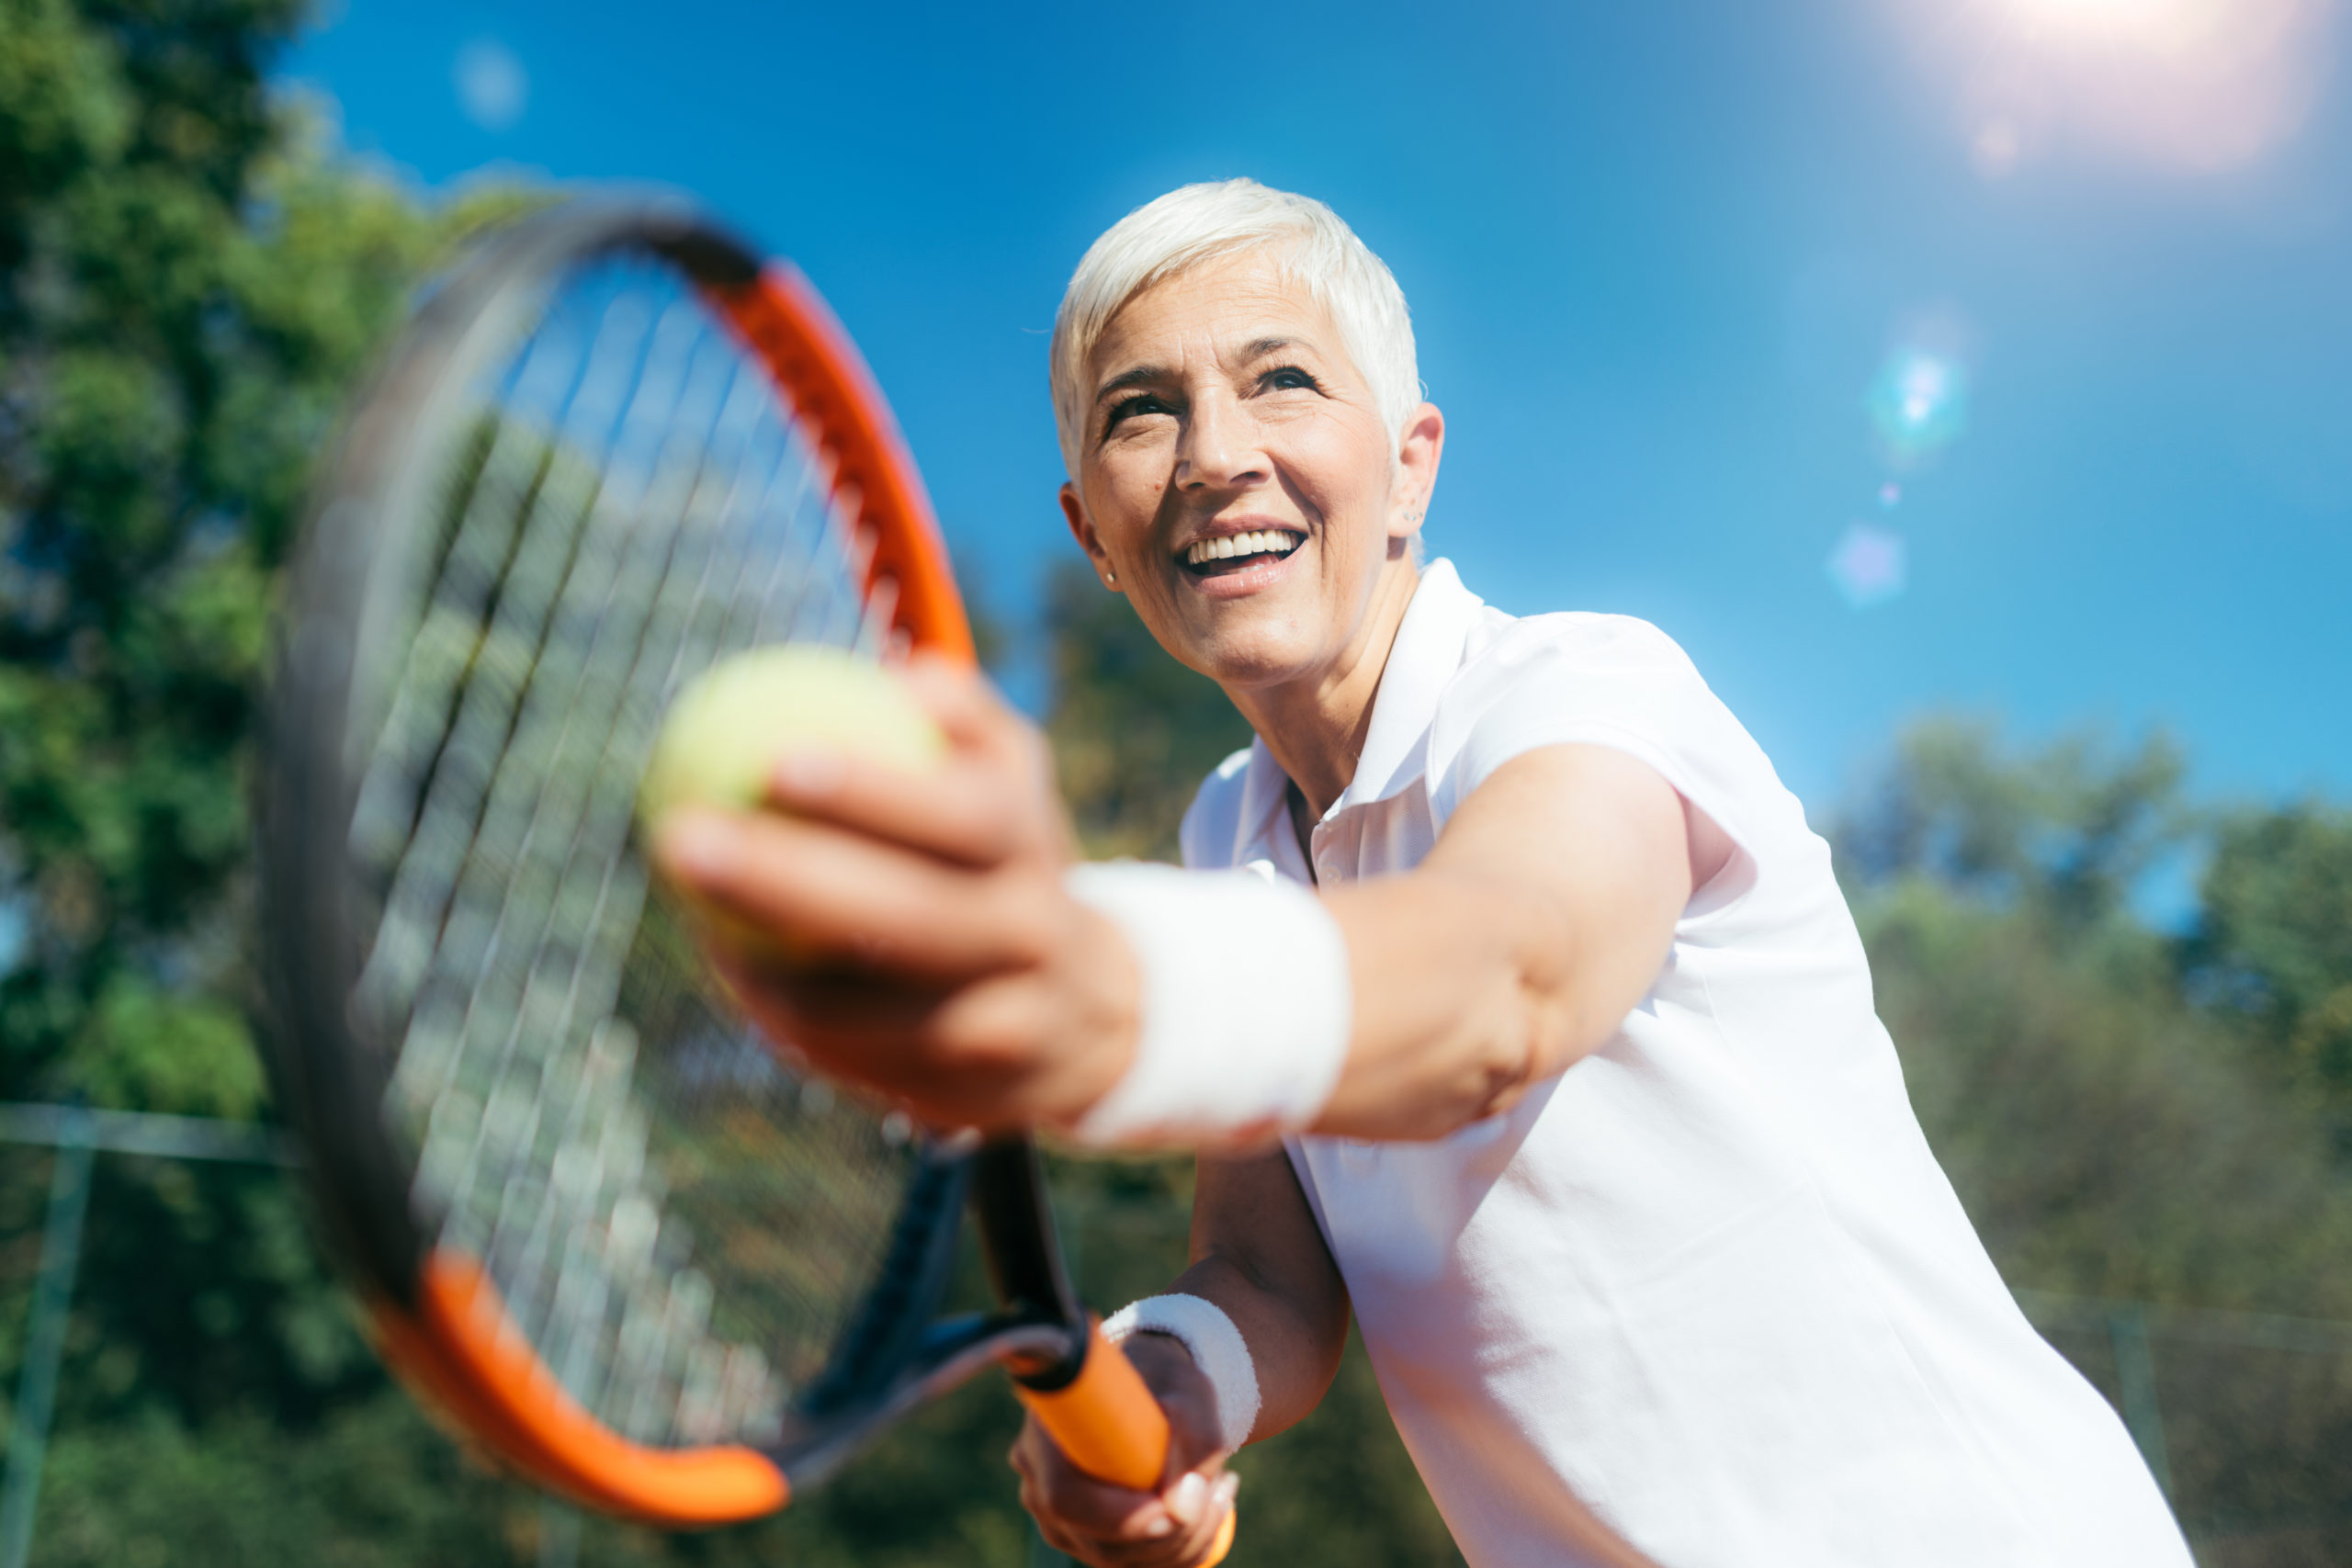 Elderly woman playing tennis and smiling.